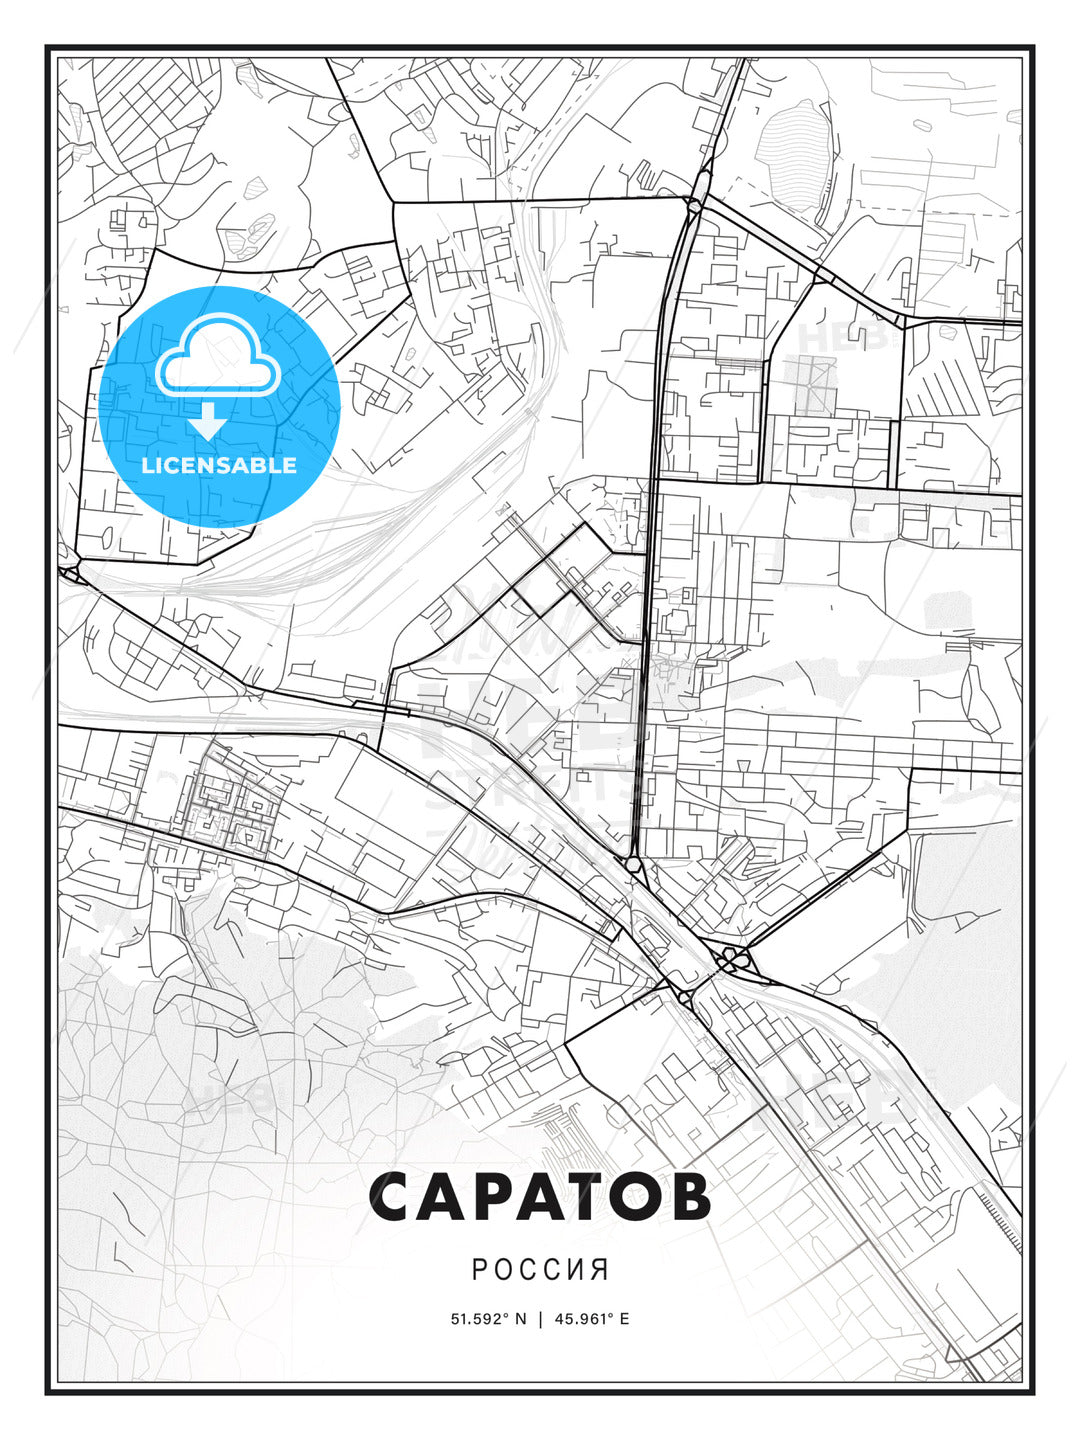 САРАТОВ / Saratov, Russia, Modern Print Template in Various Formats - HEBSTREITS Sketches